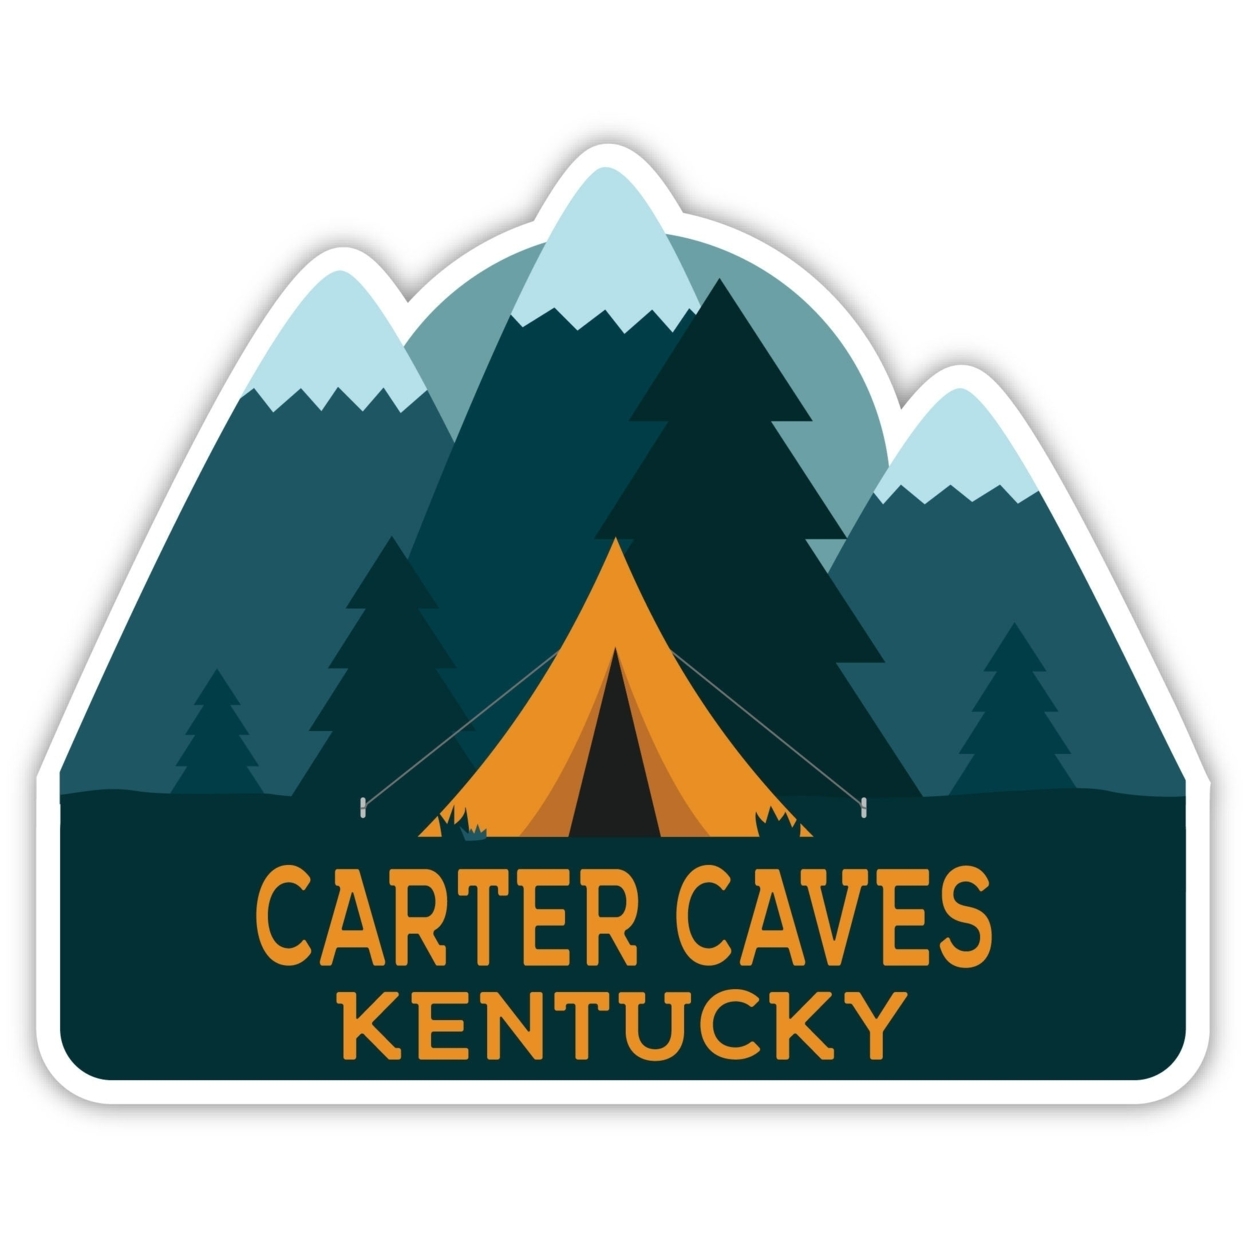 Carter Caves Kentucky Souvenir Decorative Stickers (Choose Theme And Size) - 4-Pack, 4-Inch, Tent